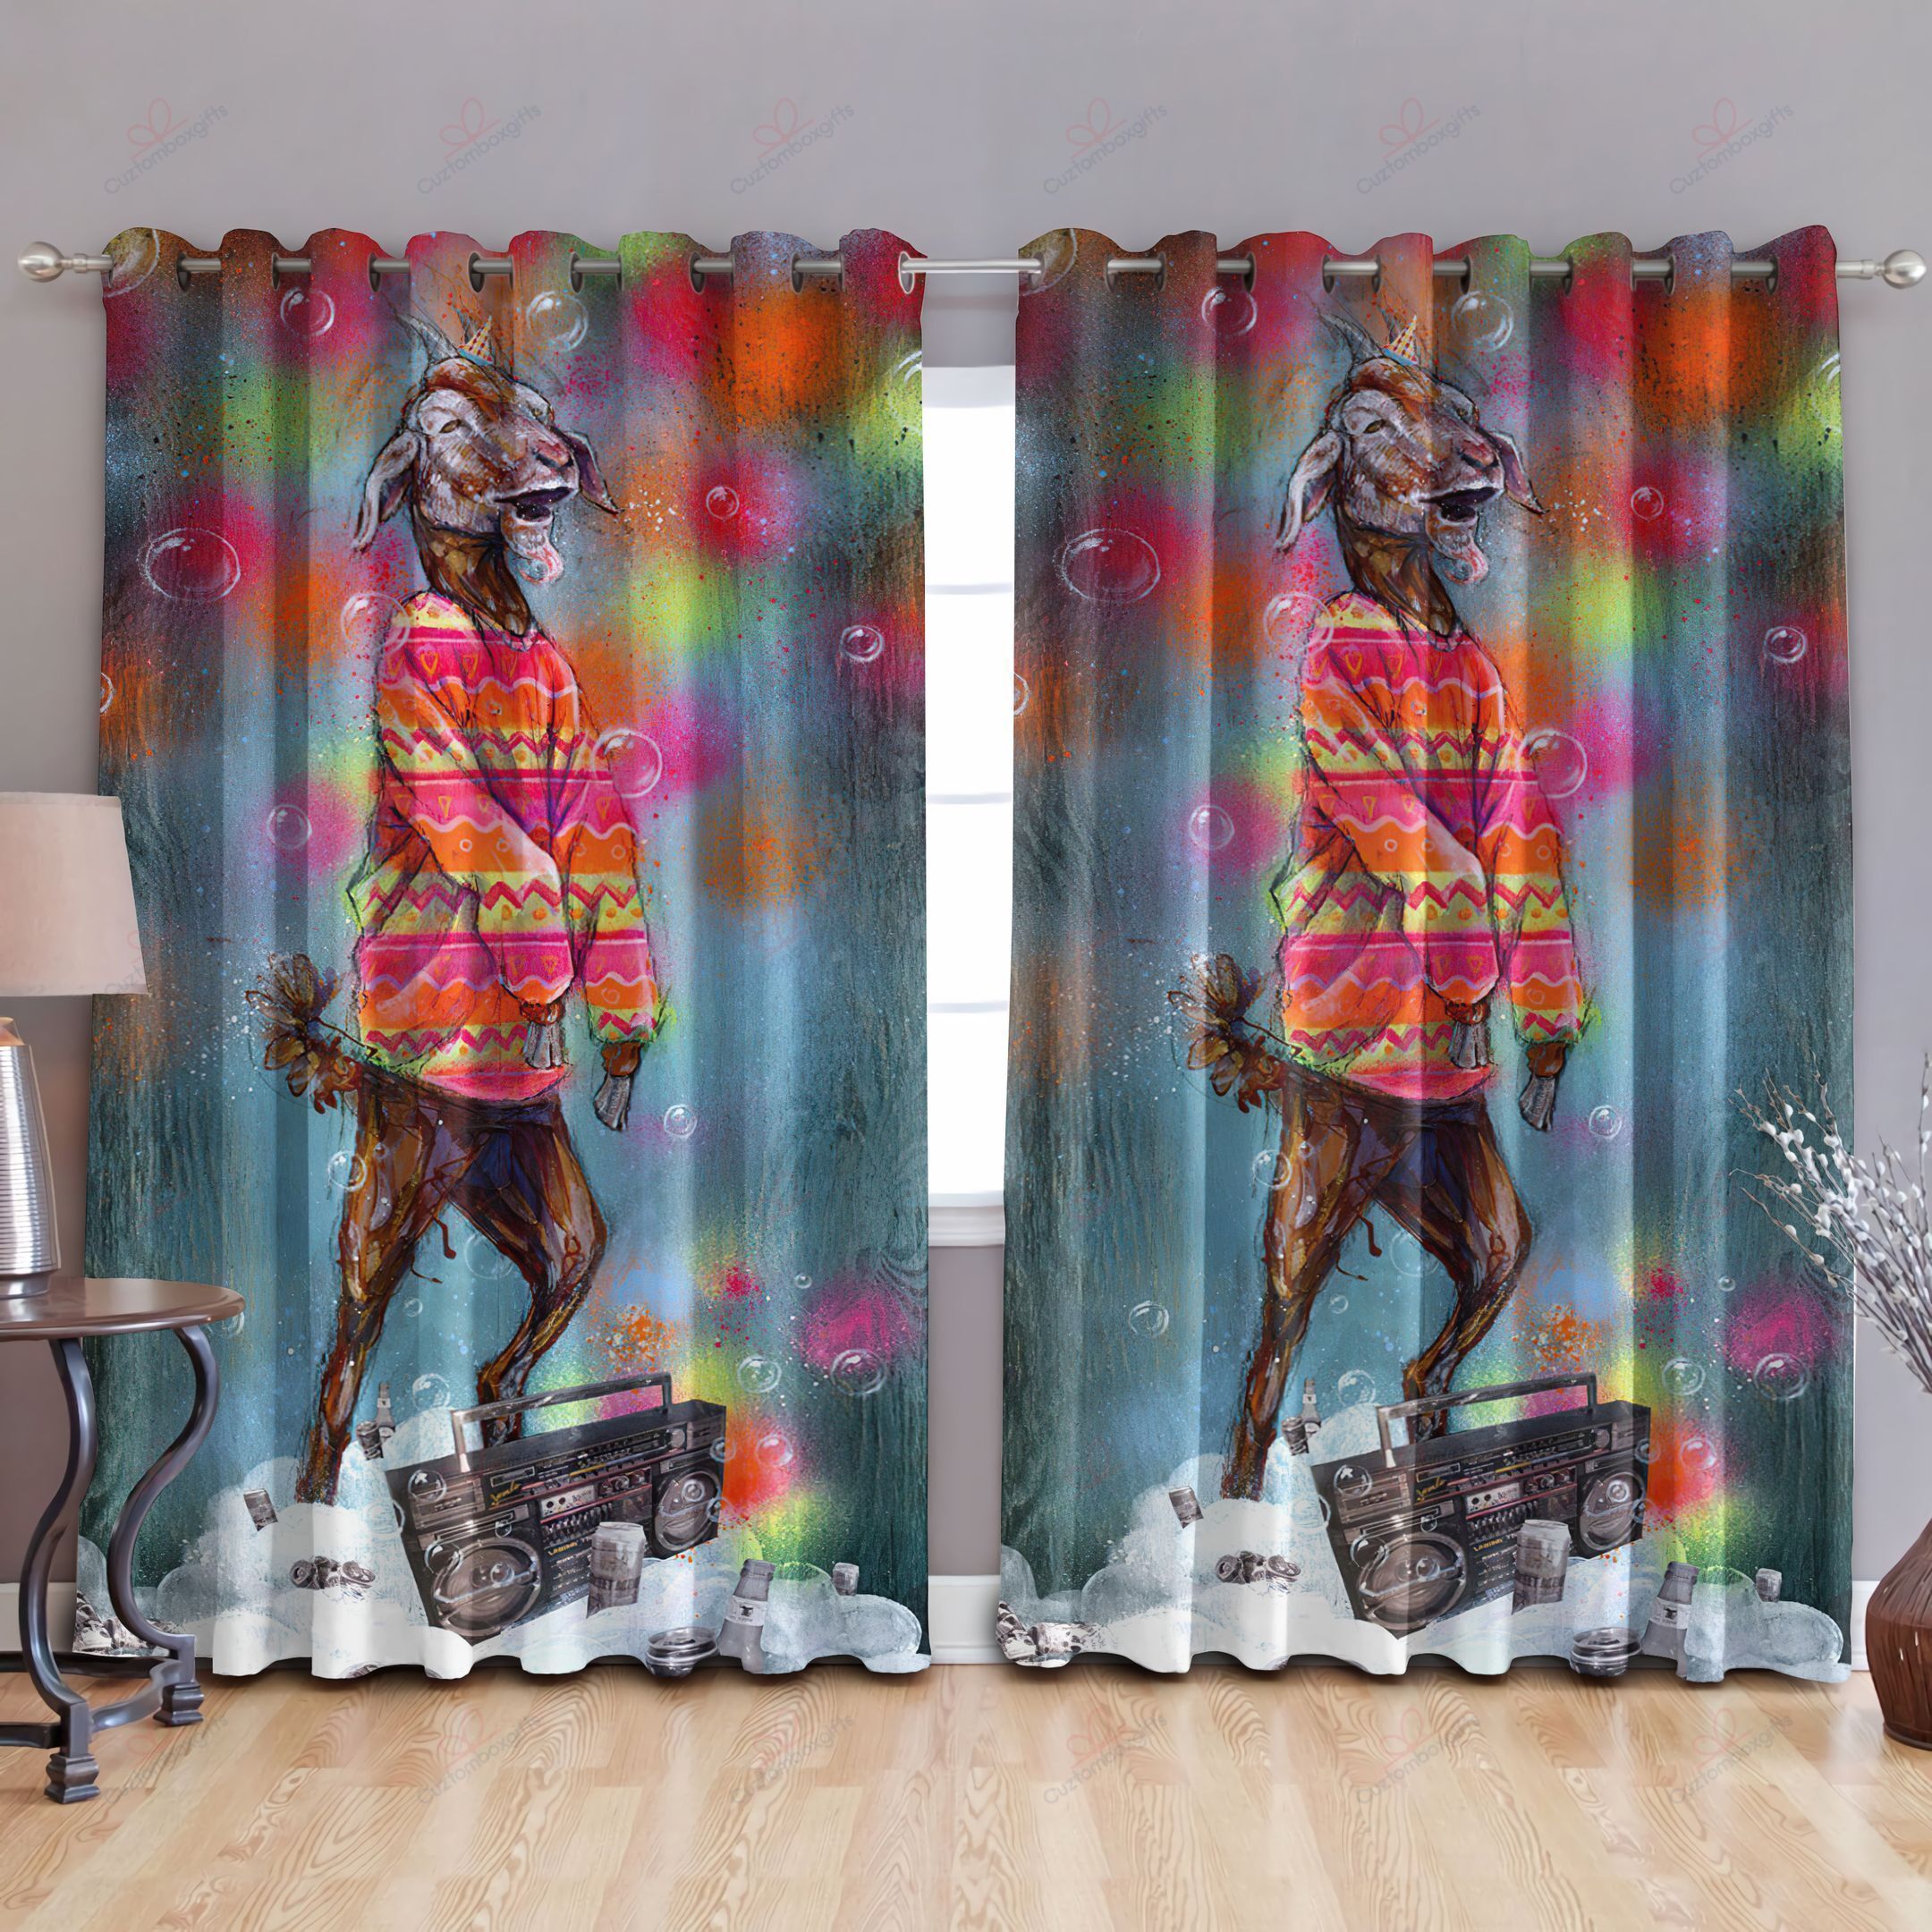 Goat Get High Printed Window Curtain Home Decor